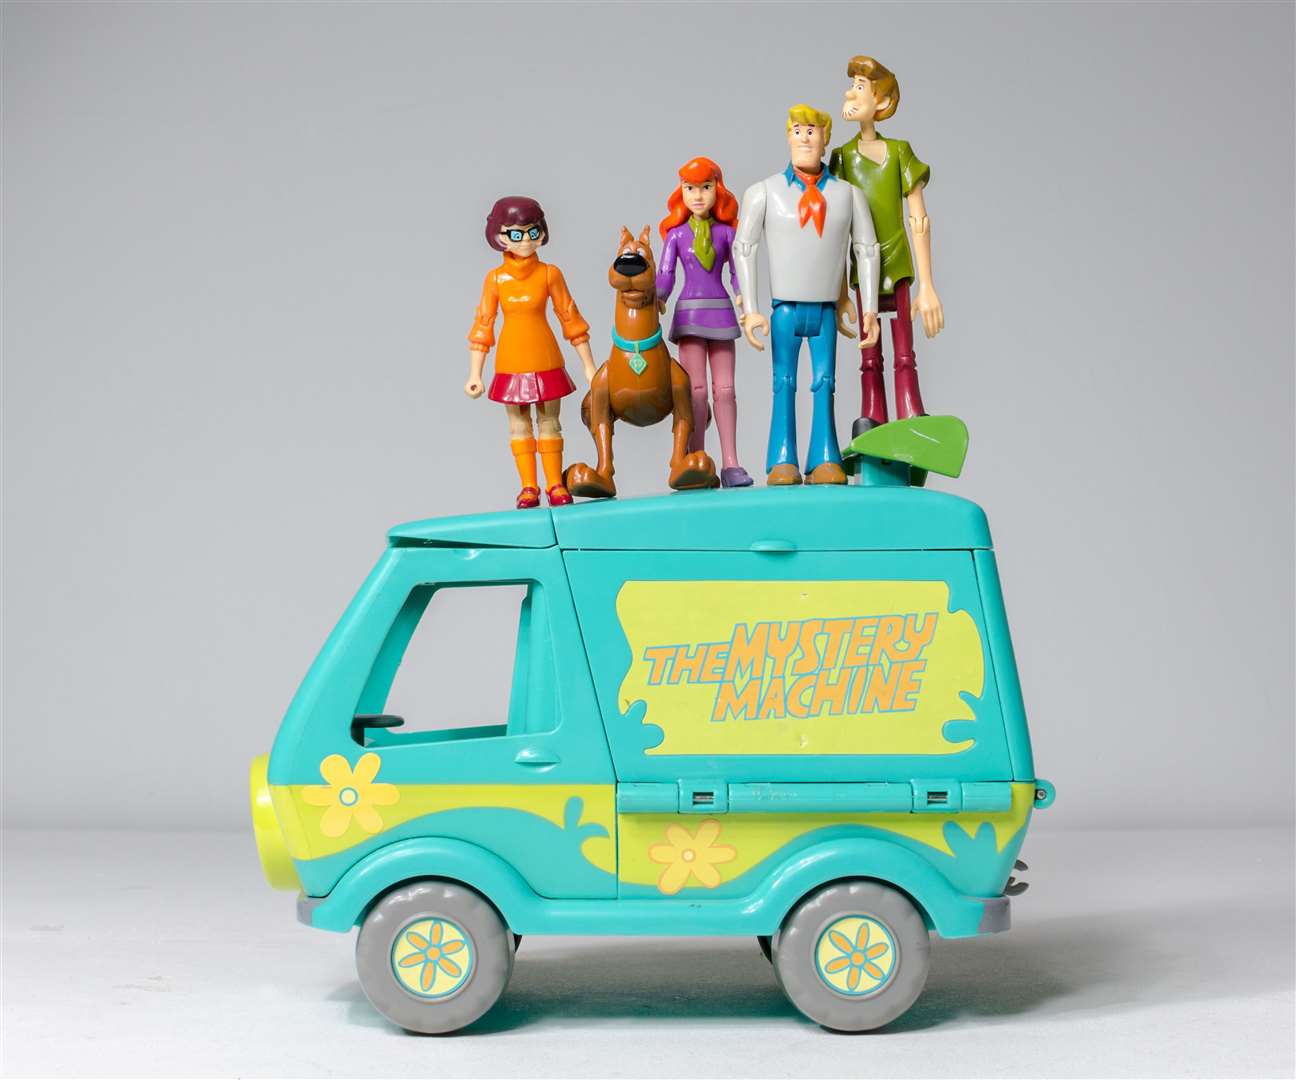 The Scooby Doo Mystery Machine from Hanna Barbera toys with regular series characters, from left, Velma Dinkley, Scooby Doo, Daphne Blake, Fred Jones and Shaggy Rogers. Picture: Adobe Stock